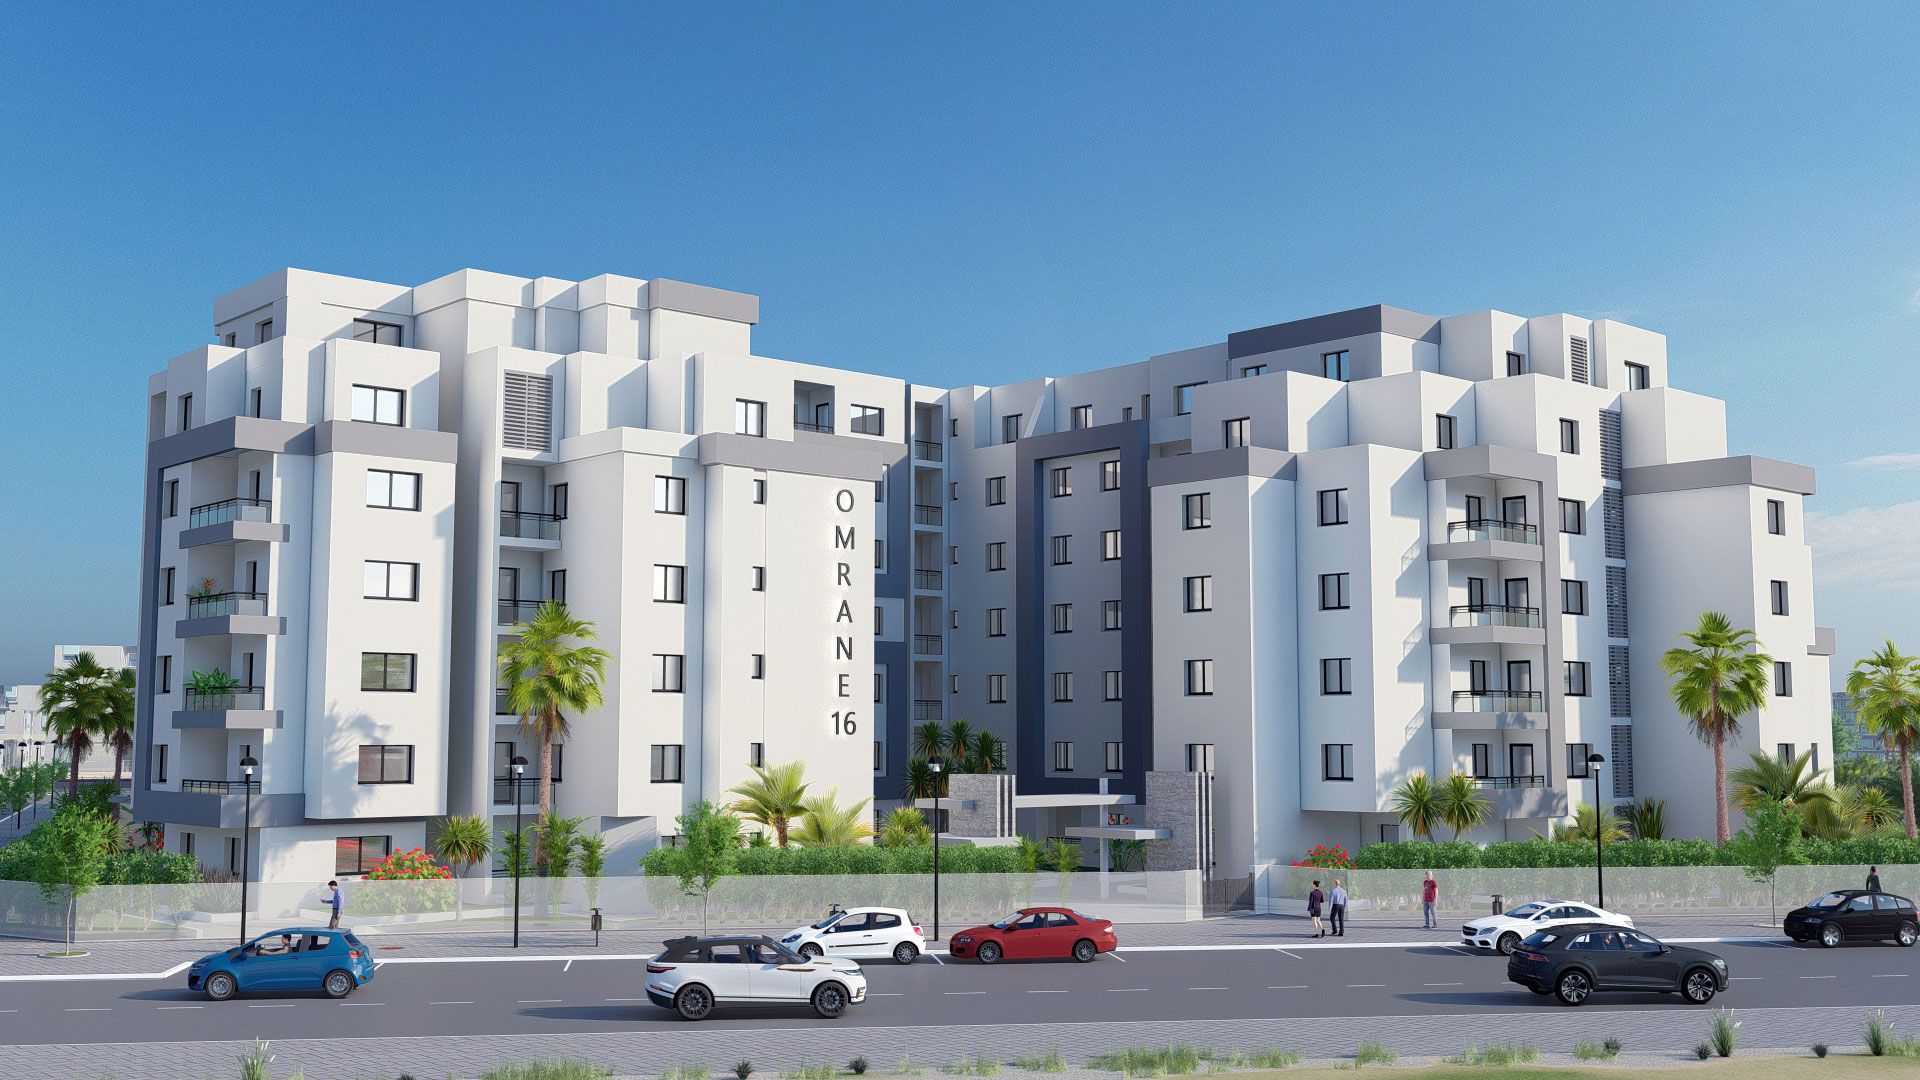 residence-omrane-16-immobiliere-du-maghreb-cite-el-ghazela-immobilier-appartement-tunisie-1-1